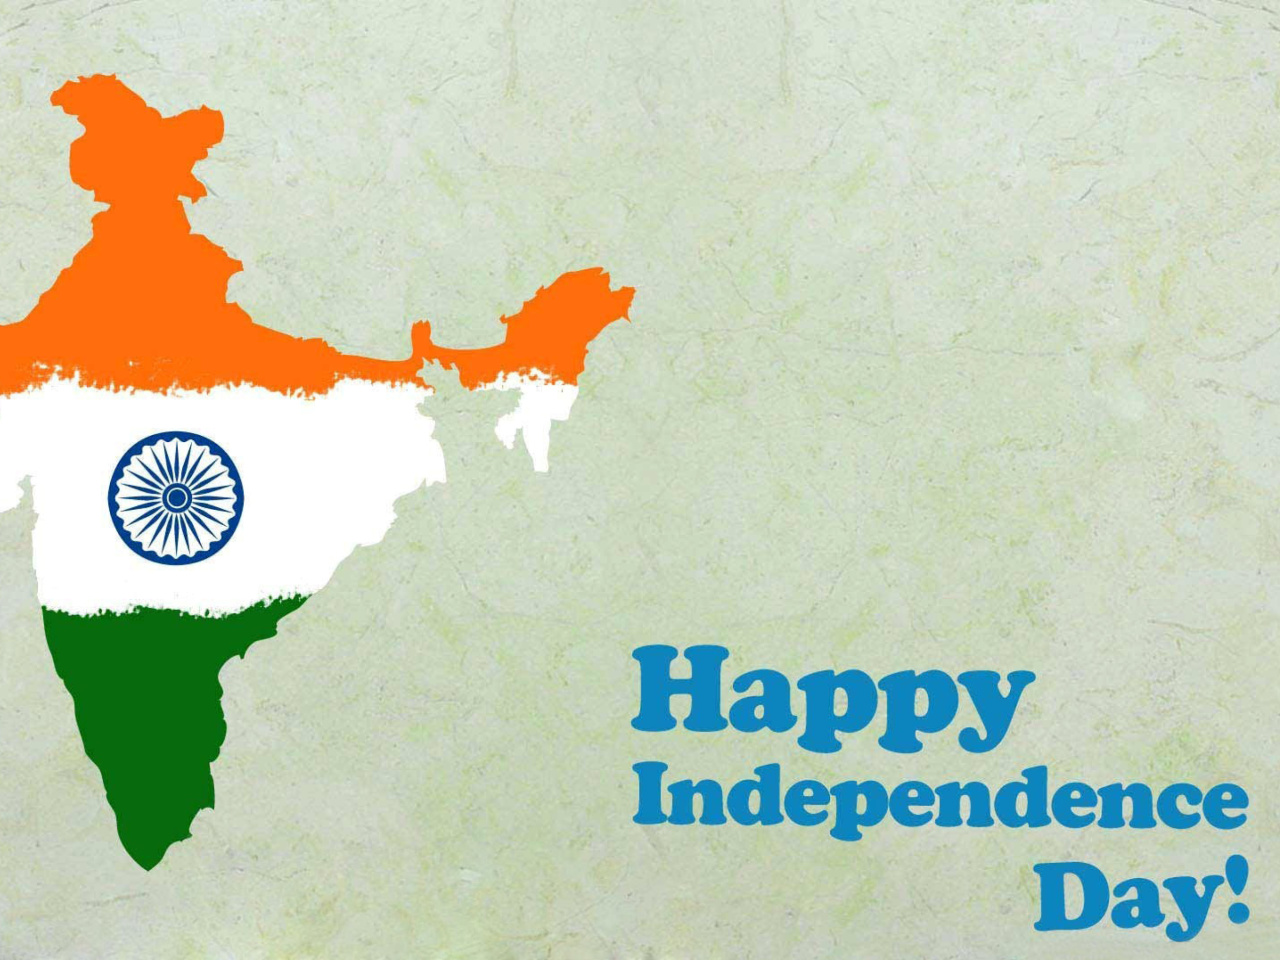 Happy Independence Day India wallpaper 1280x960